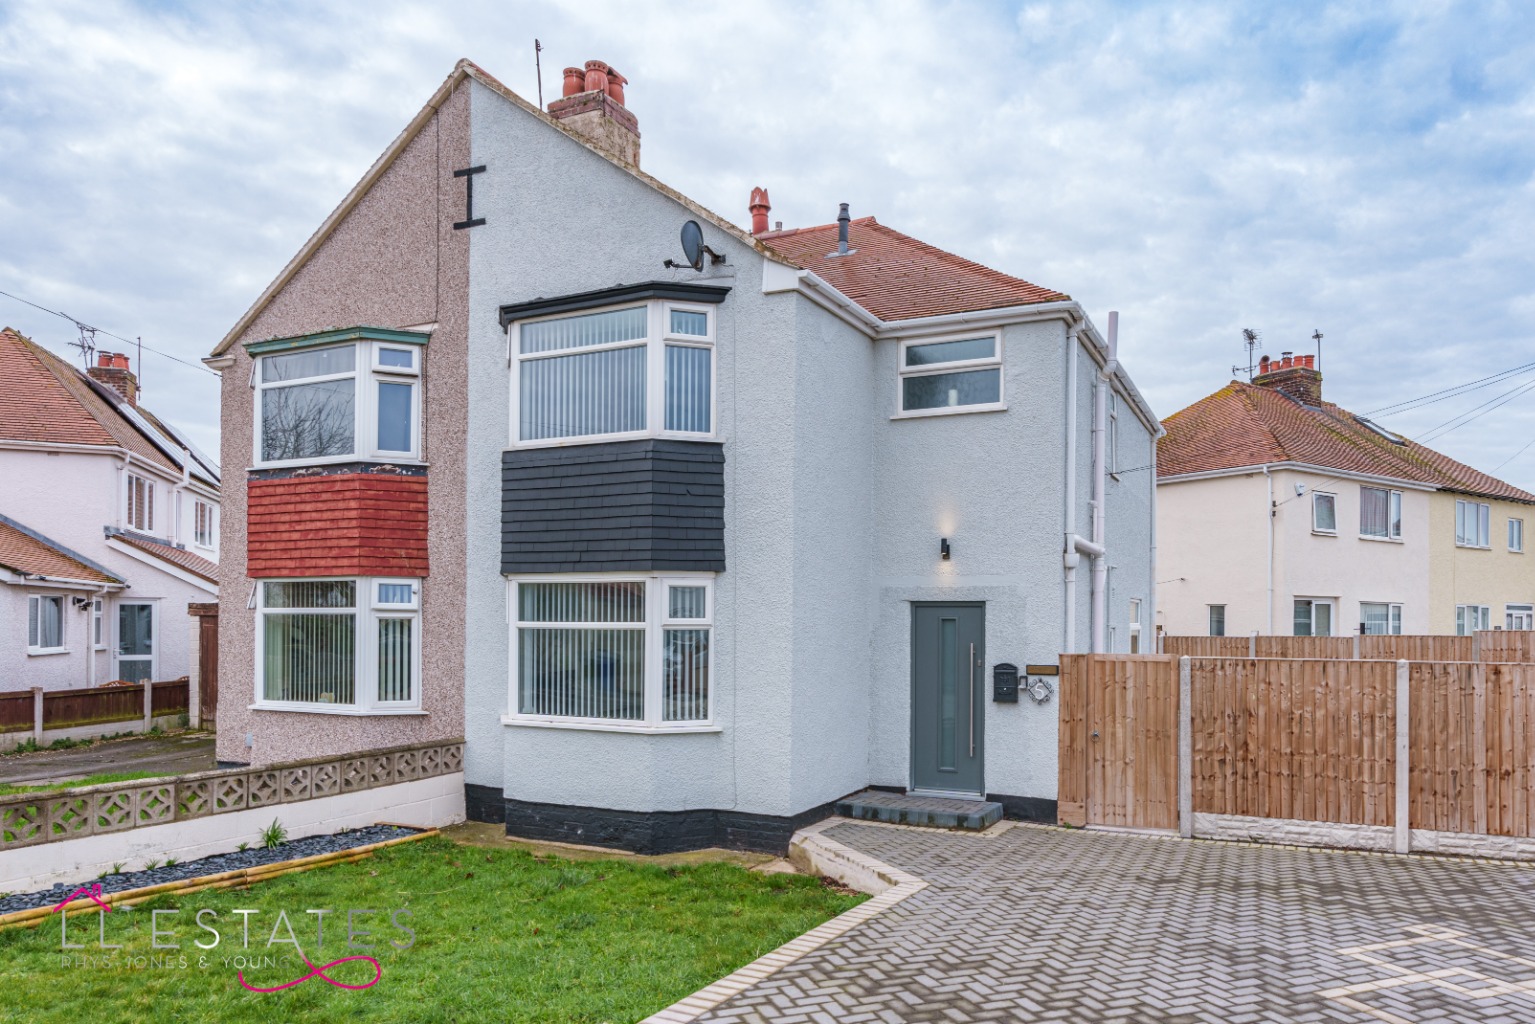 3 bed semi-detached house for sale in Brig-Y-Don, Prestatyn - Property Image 1